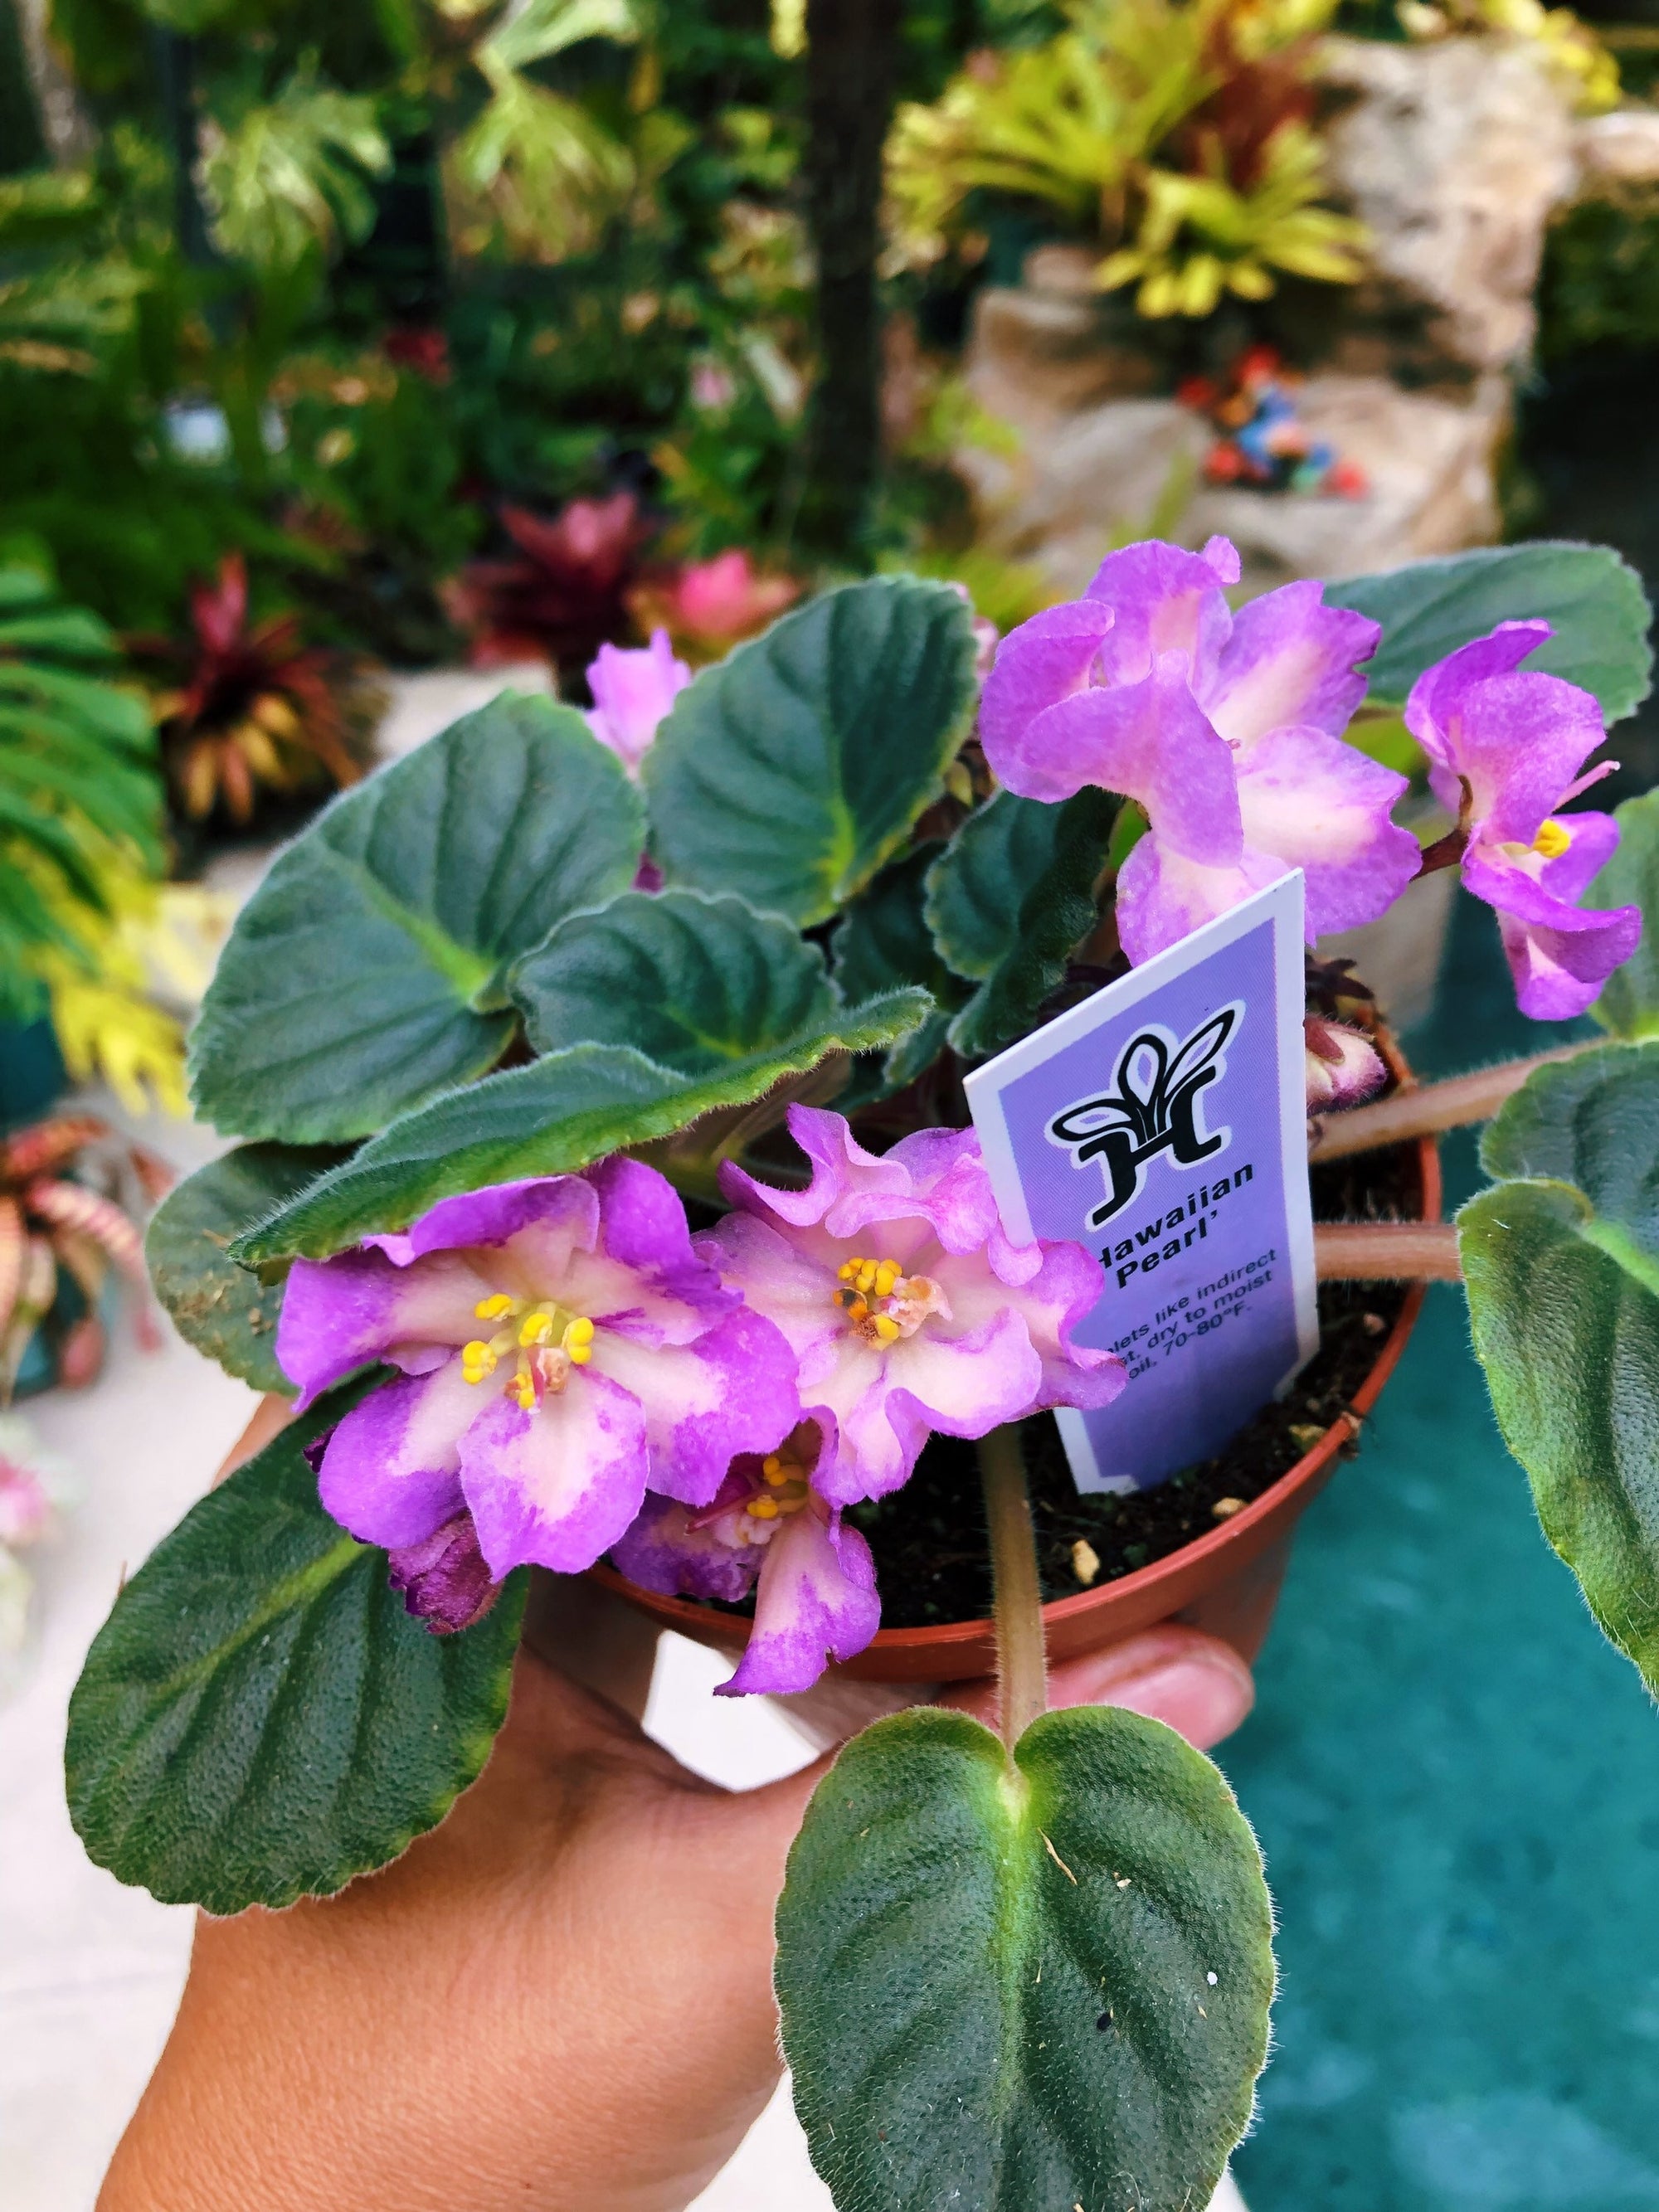 Live house plant variegated bloom African Violet Hawaiian Pearl garden 4 flower Potted gift